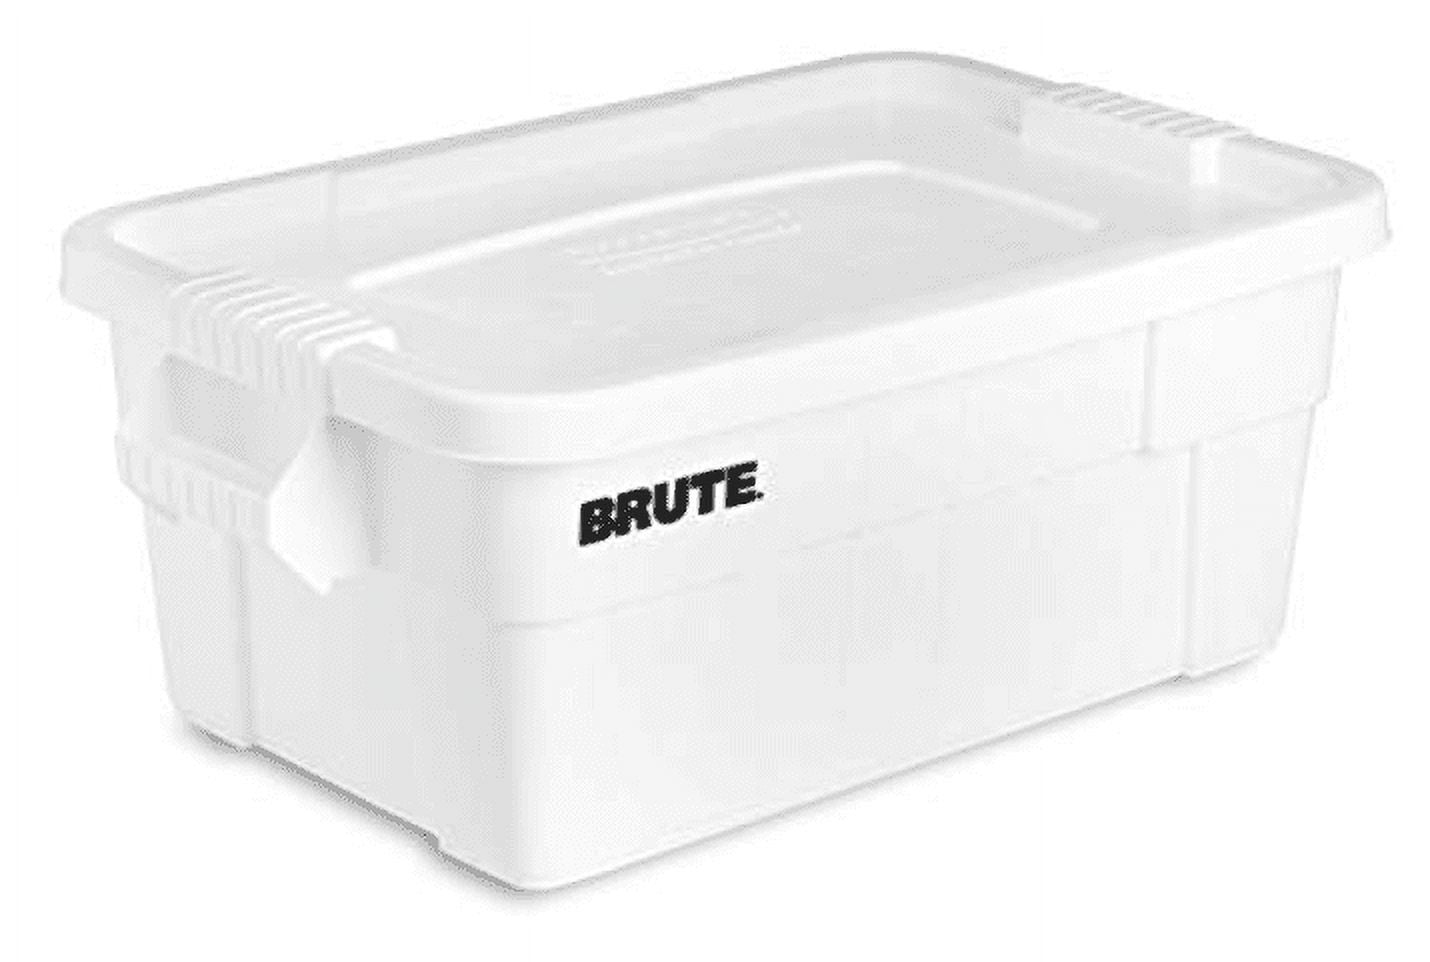 Rubbermaid Commercial Products FG9S3100WHT Rubbermaid 20 Gallon Brute Tote  with Lid FG9S3100WHT - 27-7/8 x 17-3/8 x 15-1/8 - White